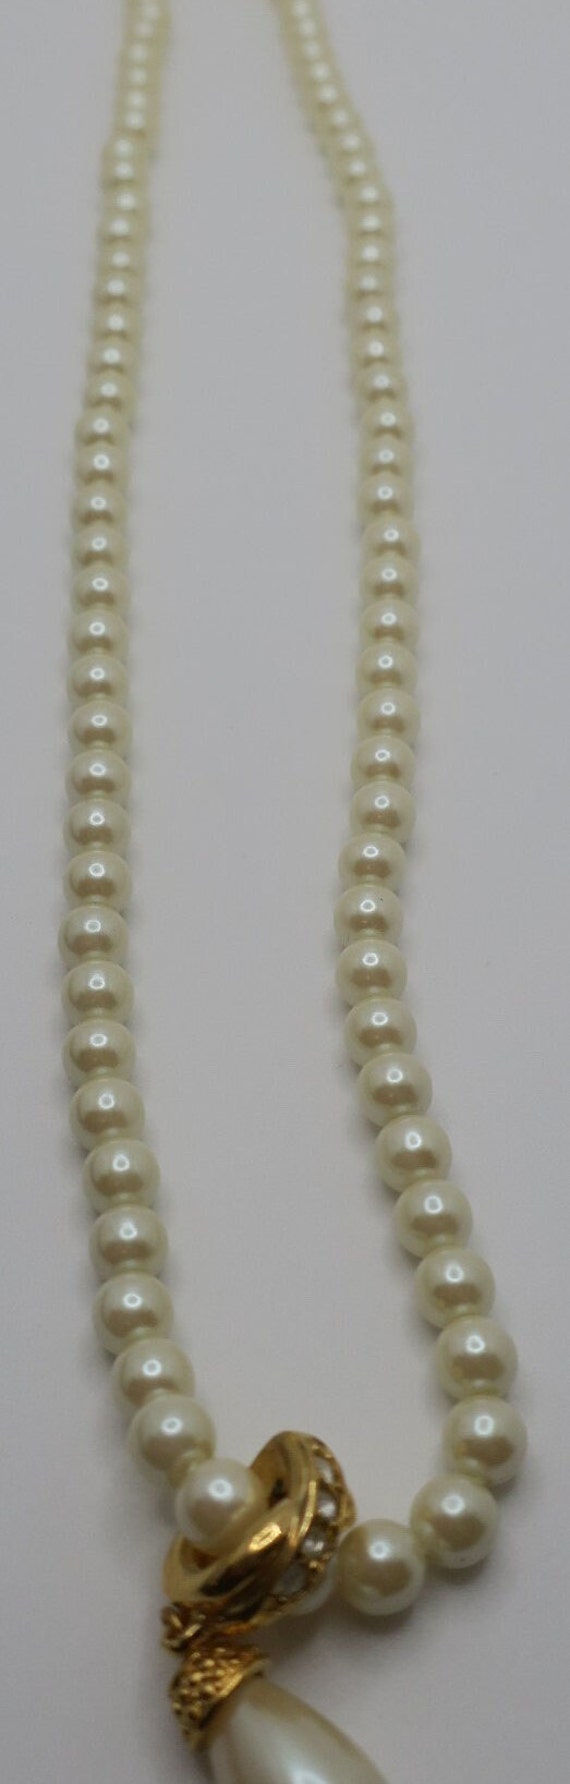 Avon Vintage Faux Pearl Necklace with Gold Tone Dr